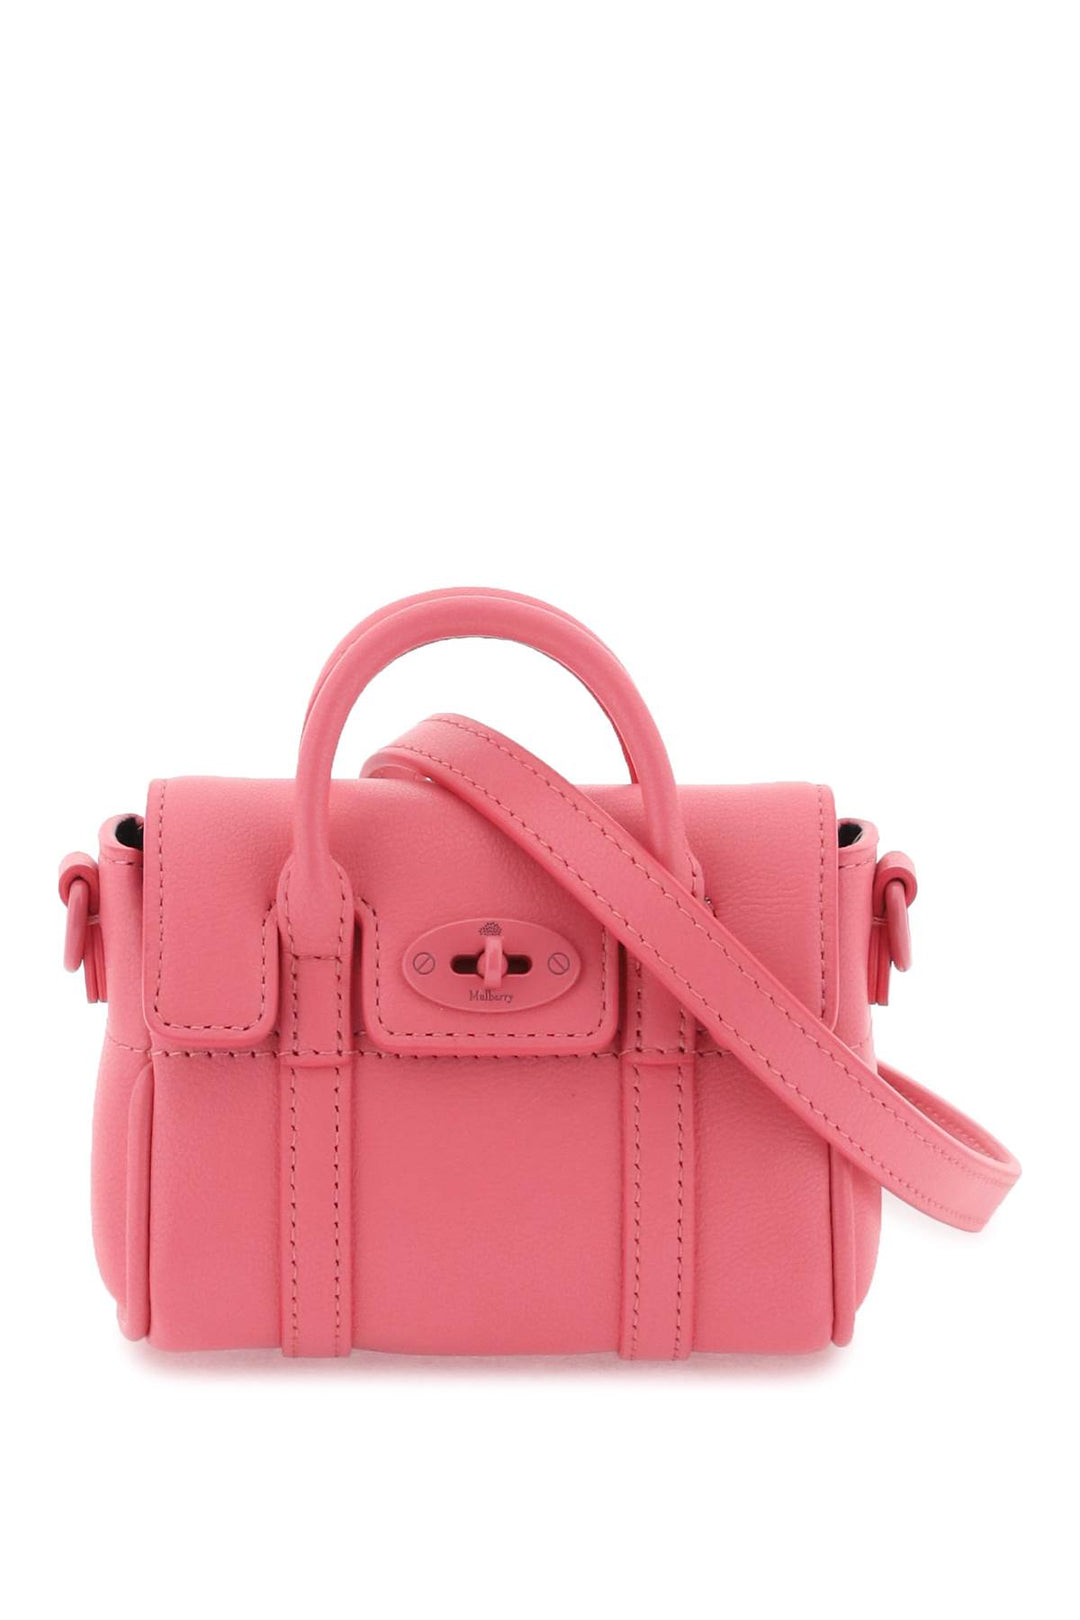 Mulberry Micro Bayswater   Rosa